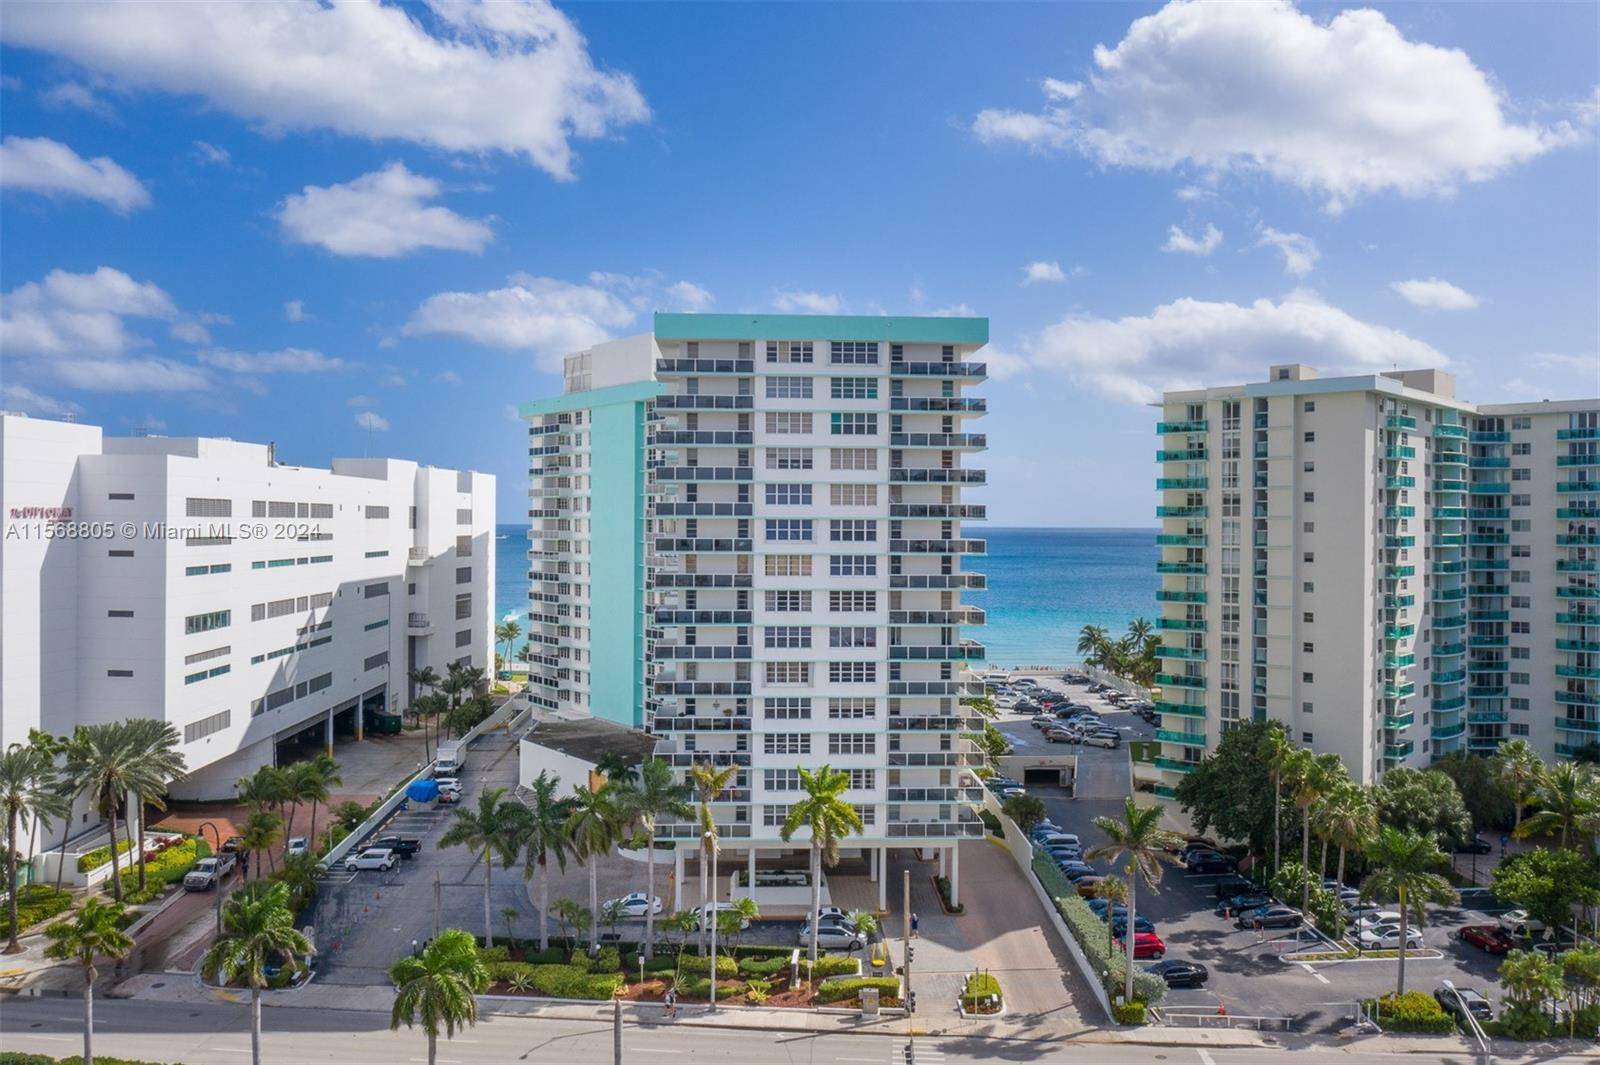 Sun and Views from every room, Beautiful OCEAN FRONT unit with wrap around balcony, tastefully renovated, fully equipped with washer dryer, sleeps 5, available for ANNUAL, MONTHLY or SEASONAL rental.